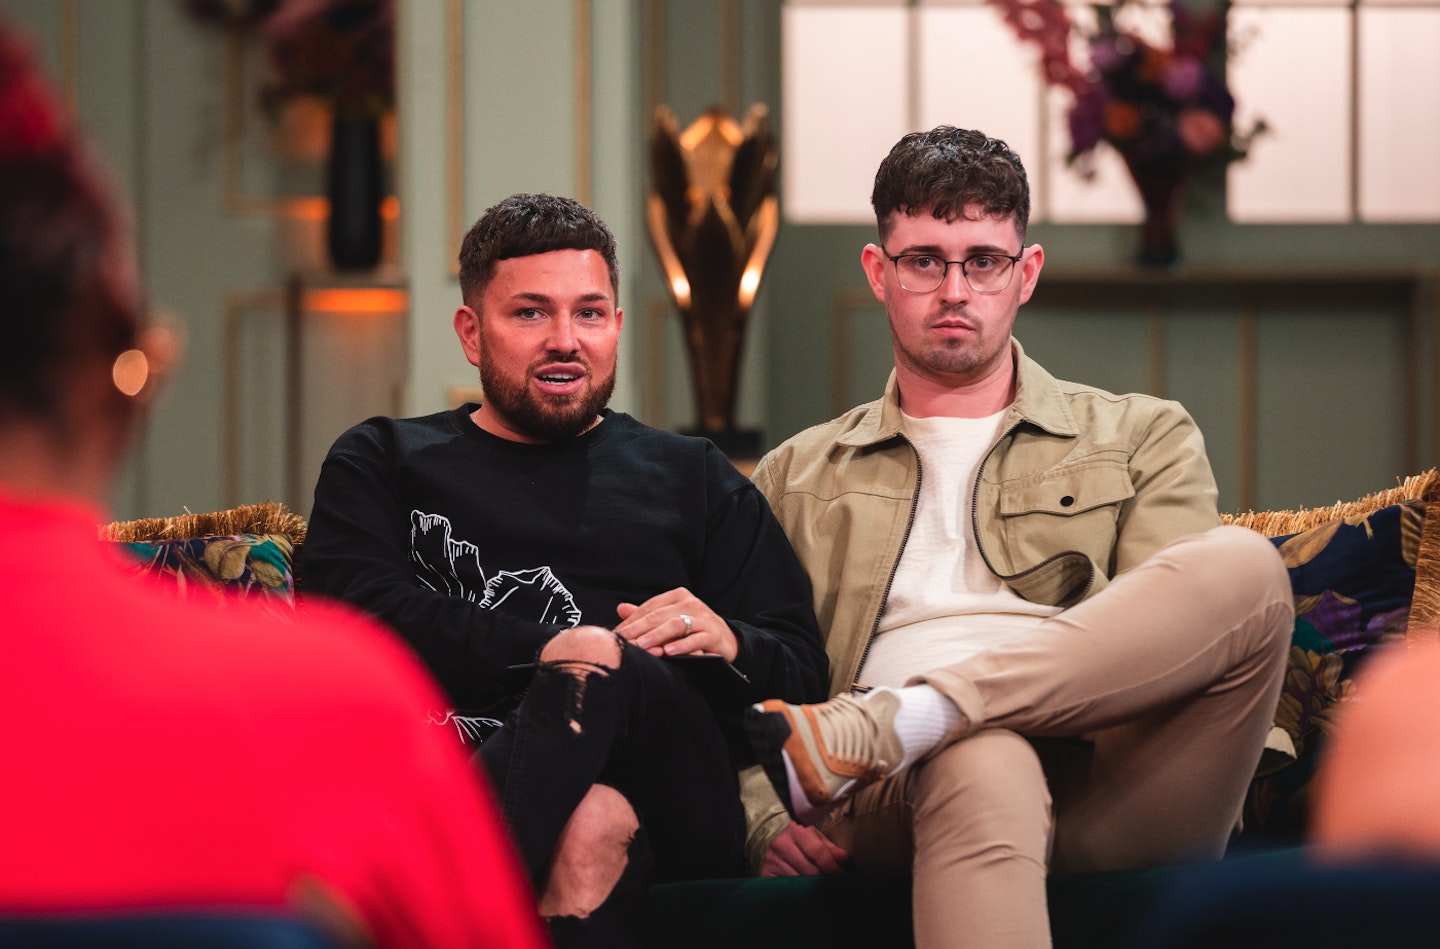 married at first sight's mark and sean sitting together